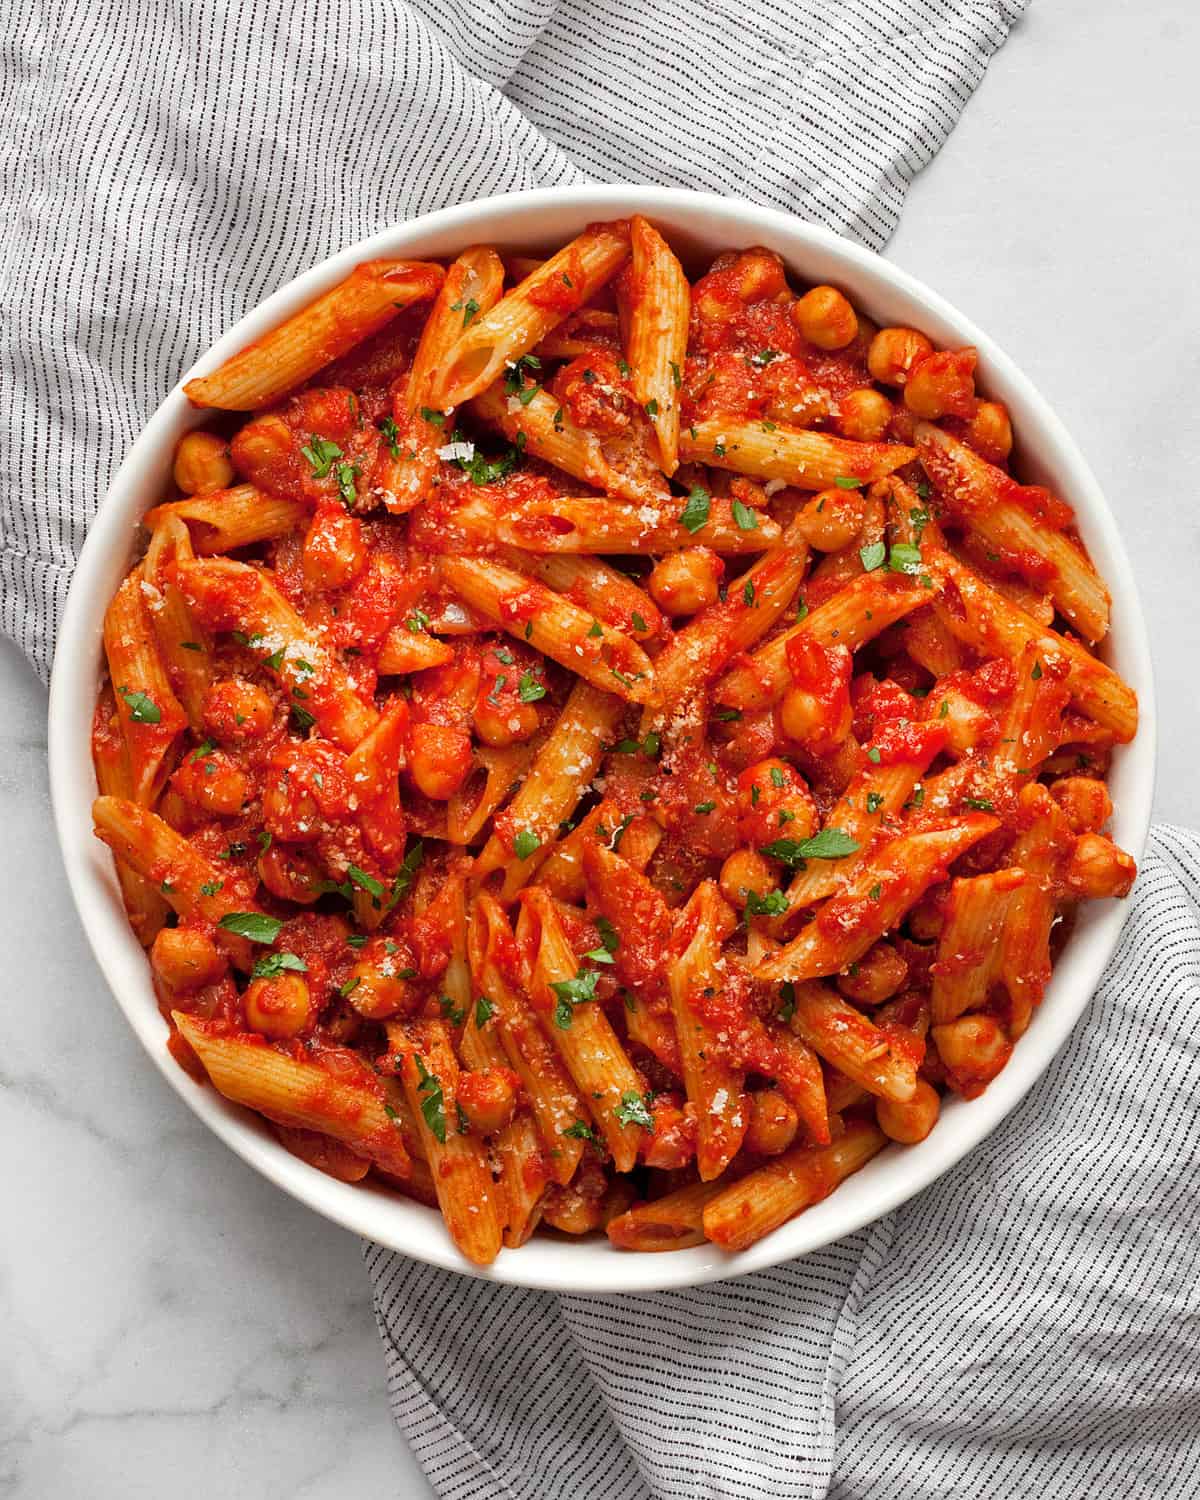 Enjoy a Tasty Meal with This Step-by-Step Arrabiata Sausage Pasta Recipe Guide